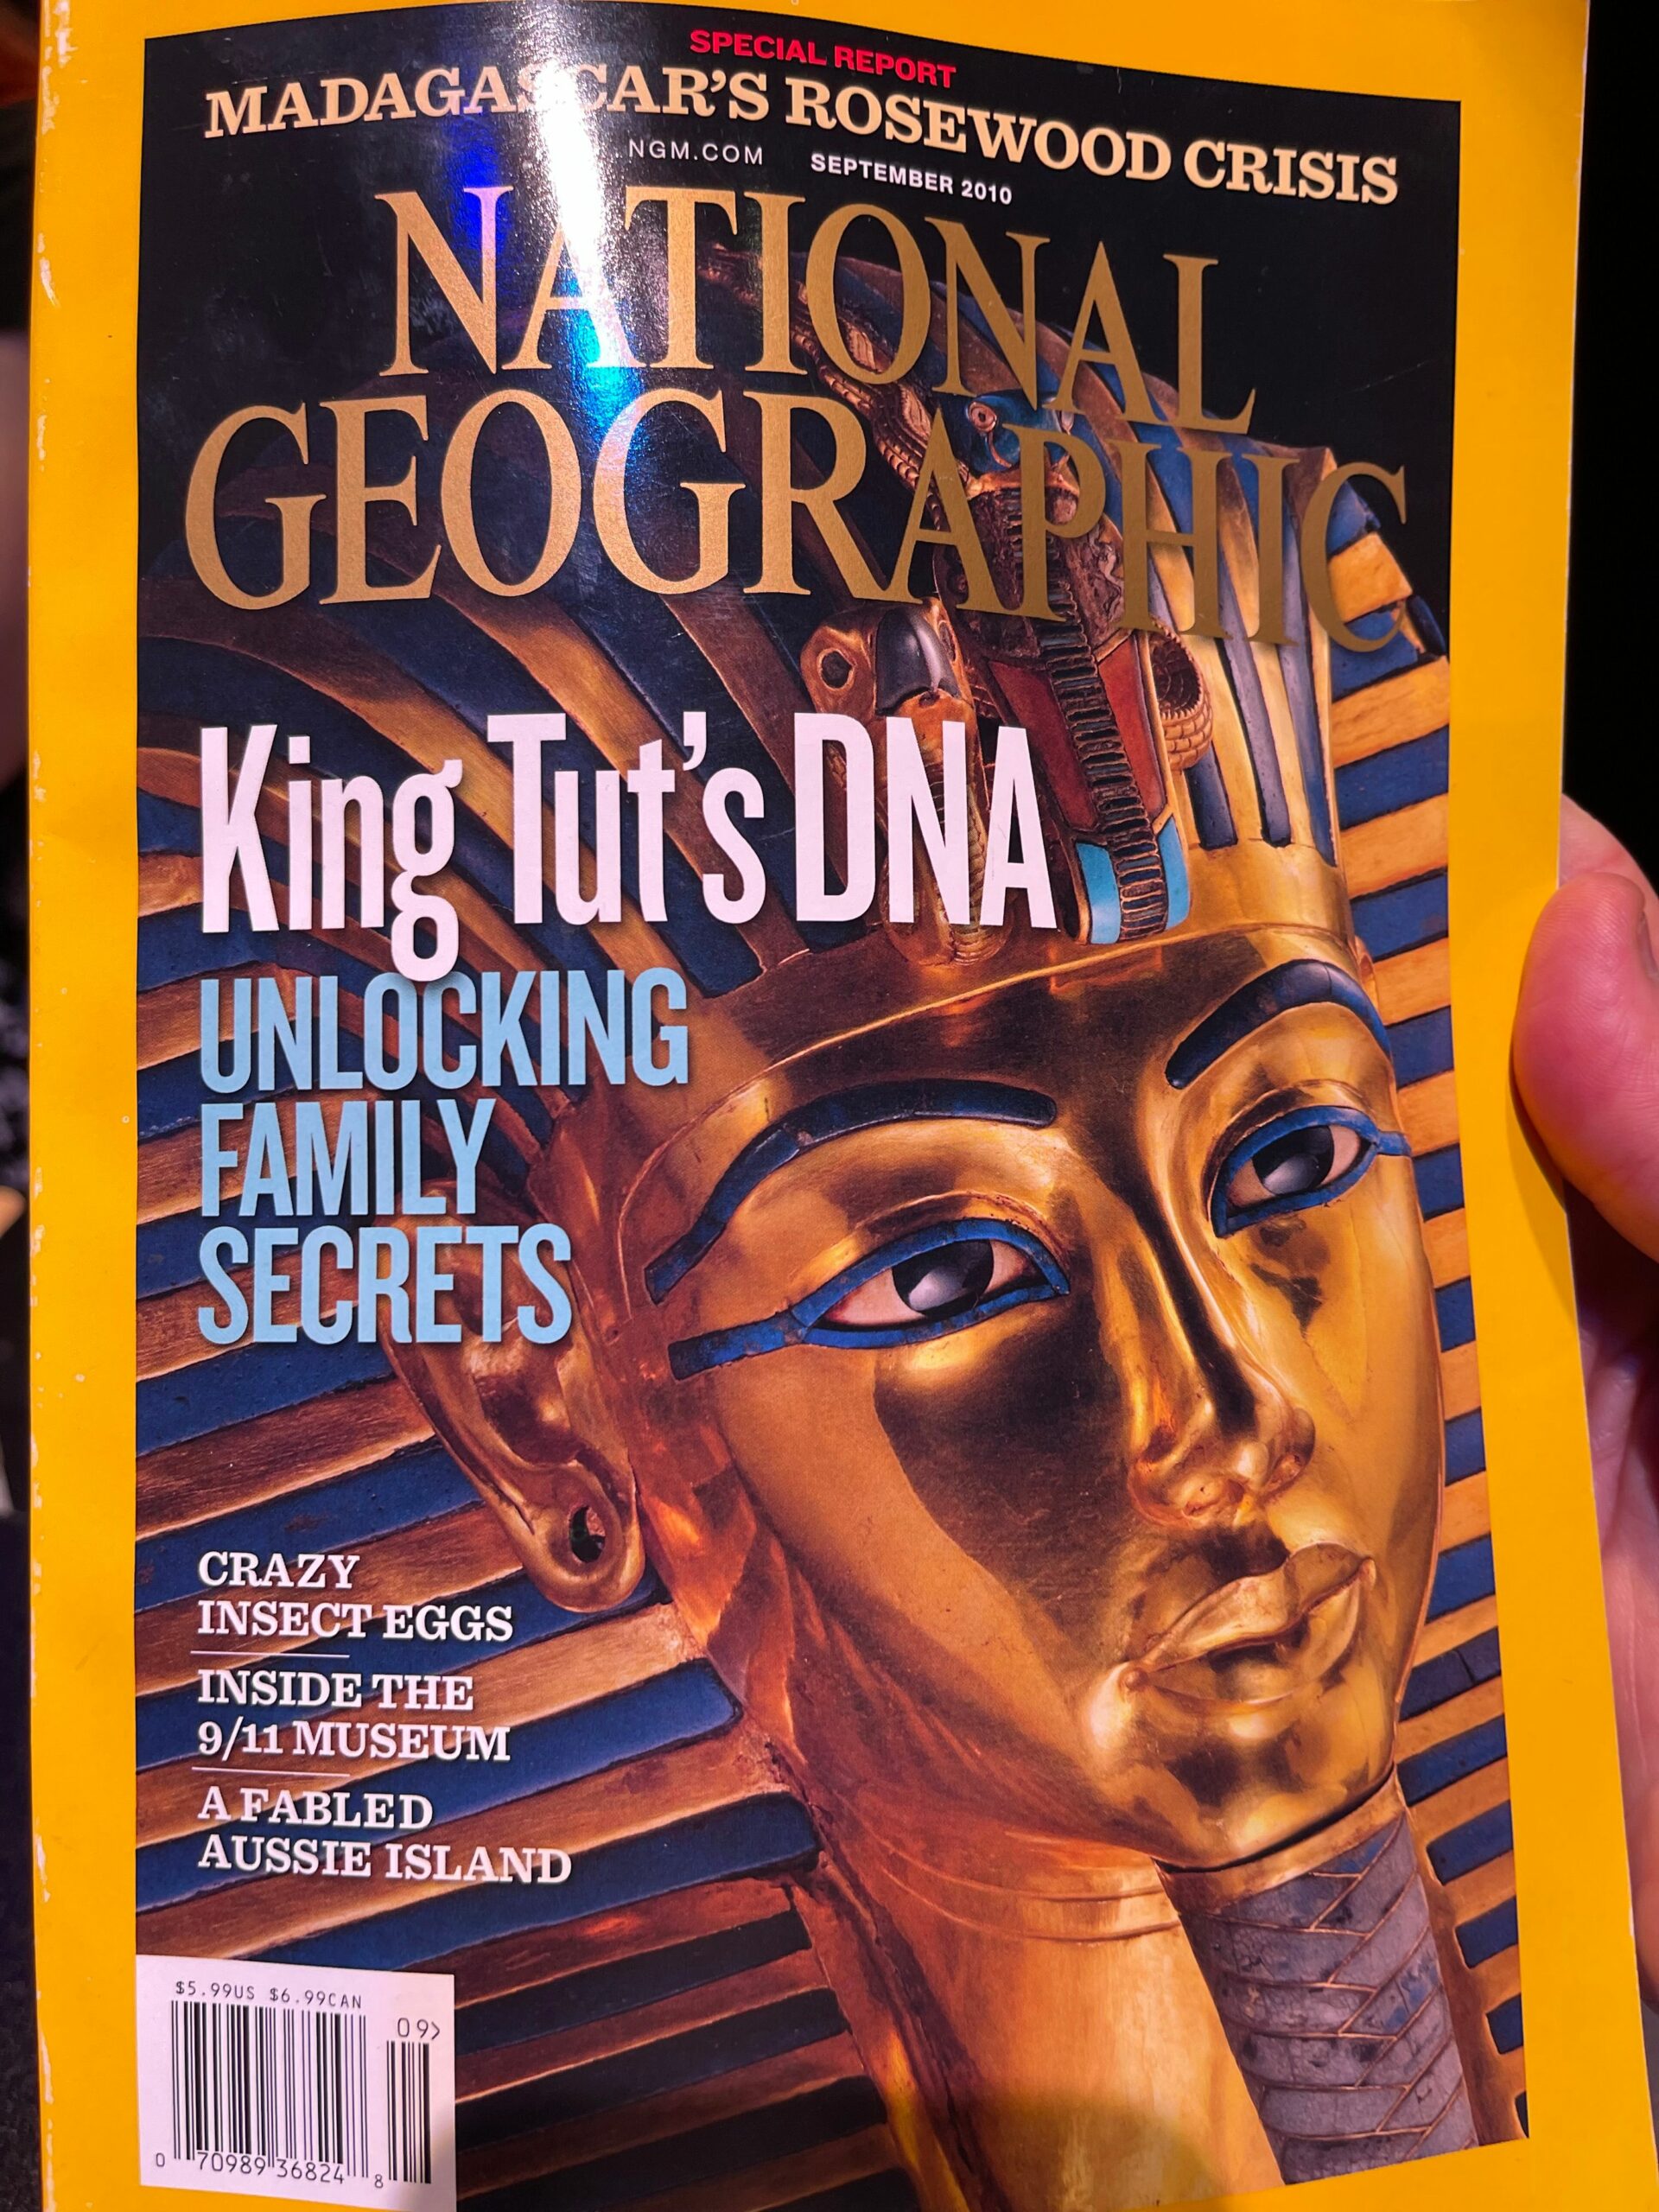 National Geographic's 2010 issue featuring Tut